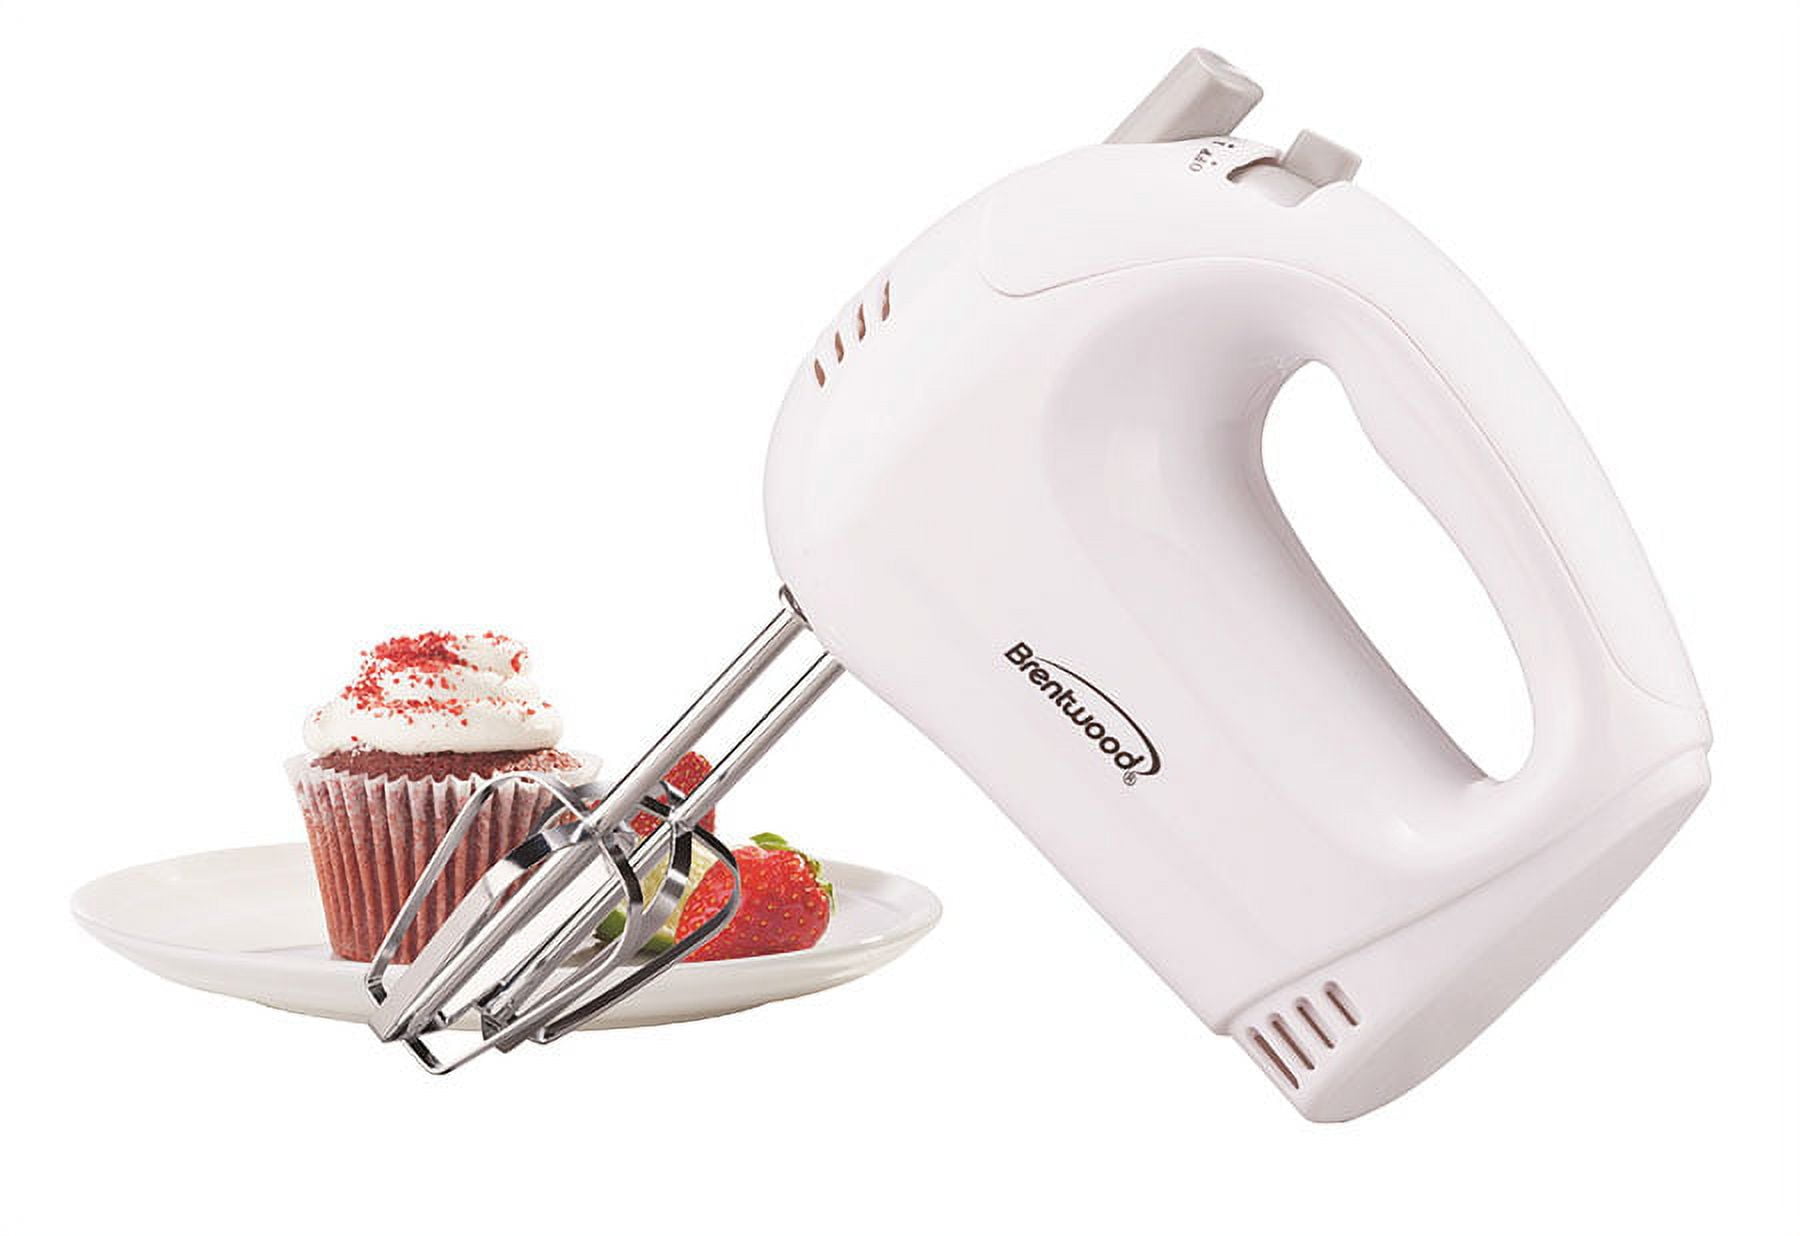 HOME ESSENTIAL HM-125458 Hand Mixer Instruction Manual